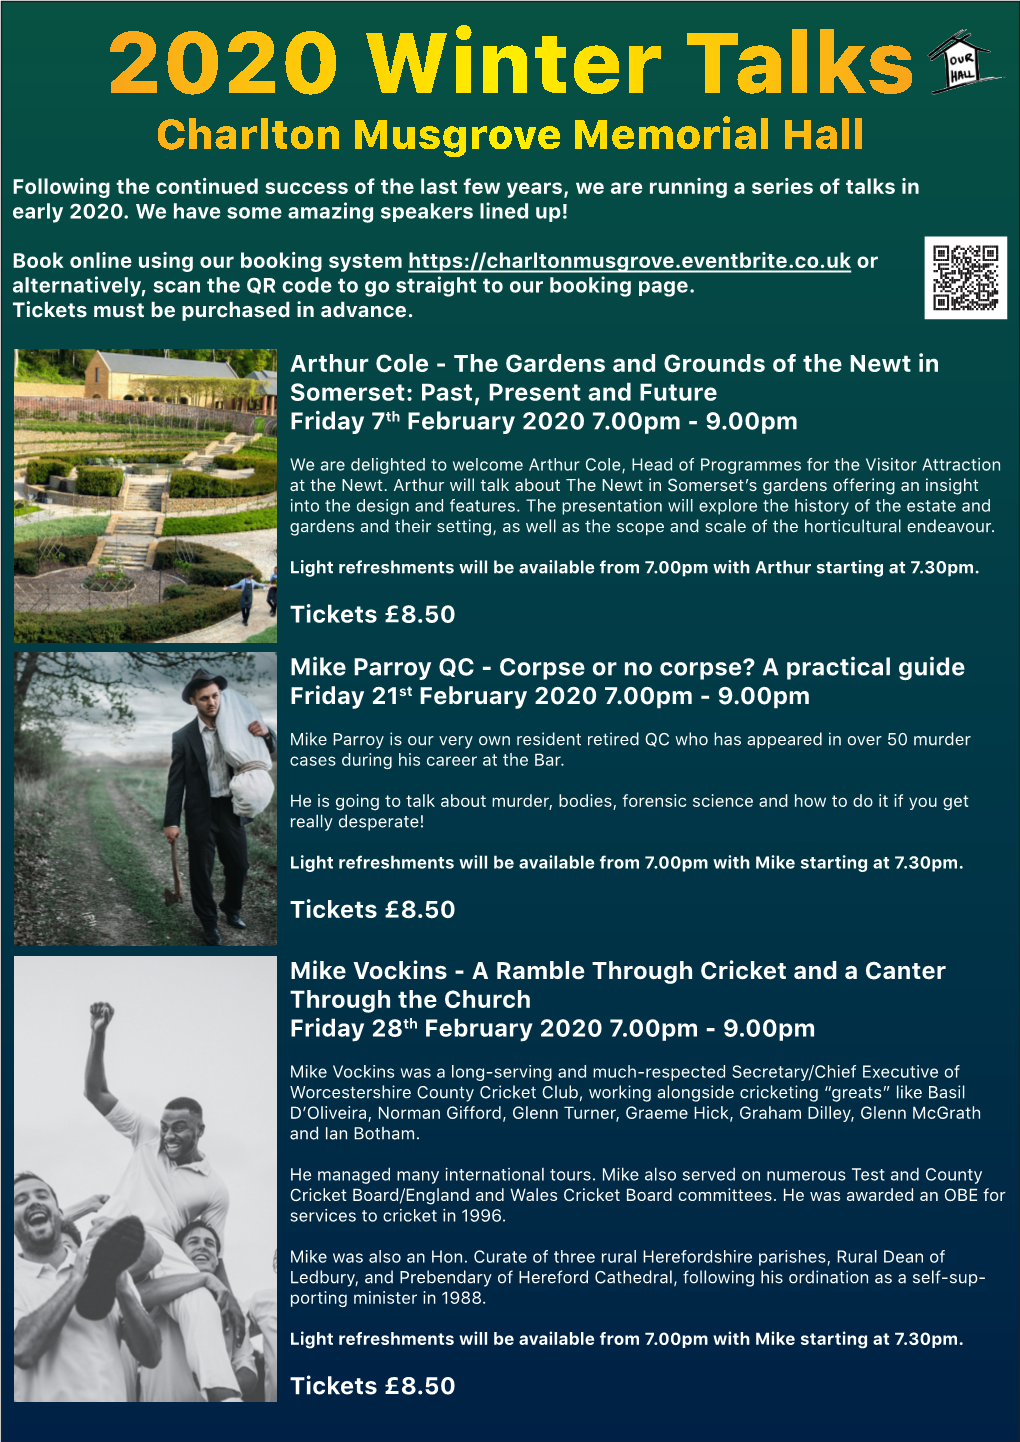 2020 Winter Talks Charlton Musgrove Memorial Hall Following the Continued Success of the Last Few Years, We Are Running a Series of Talks in Early 2020